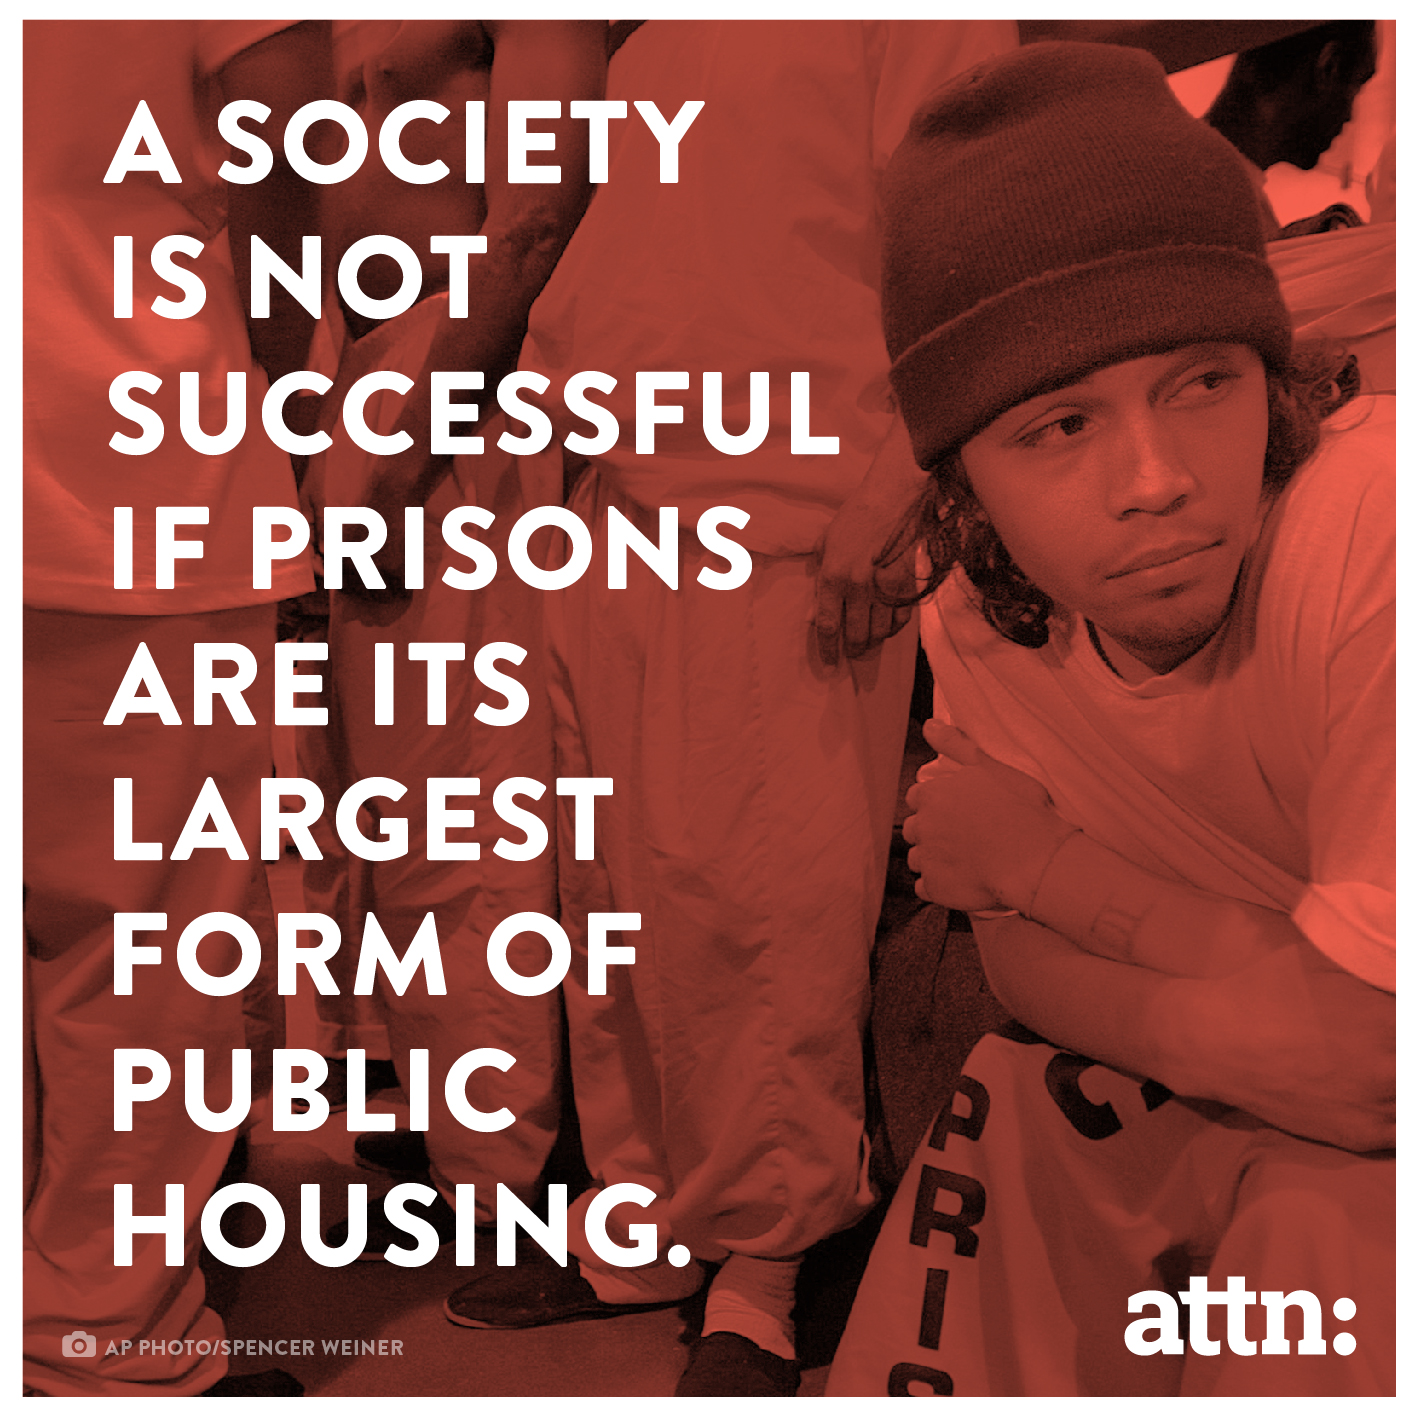 A nation's biggest form of public housing should not be prison